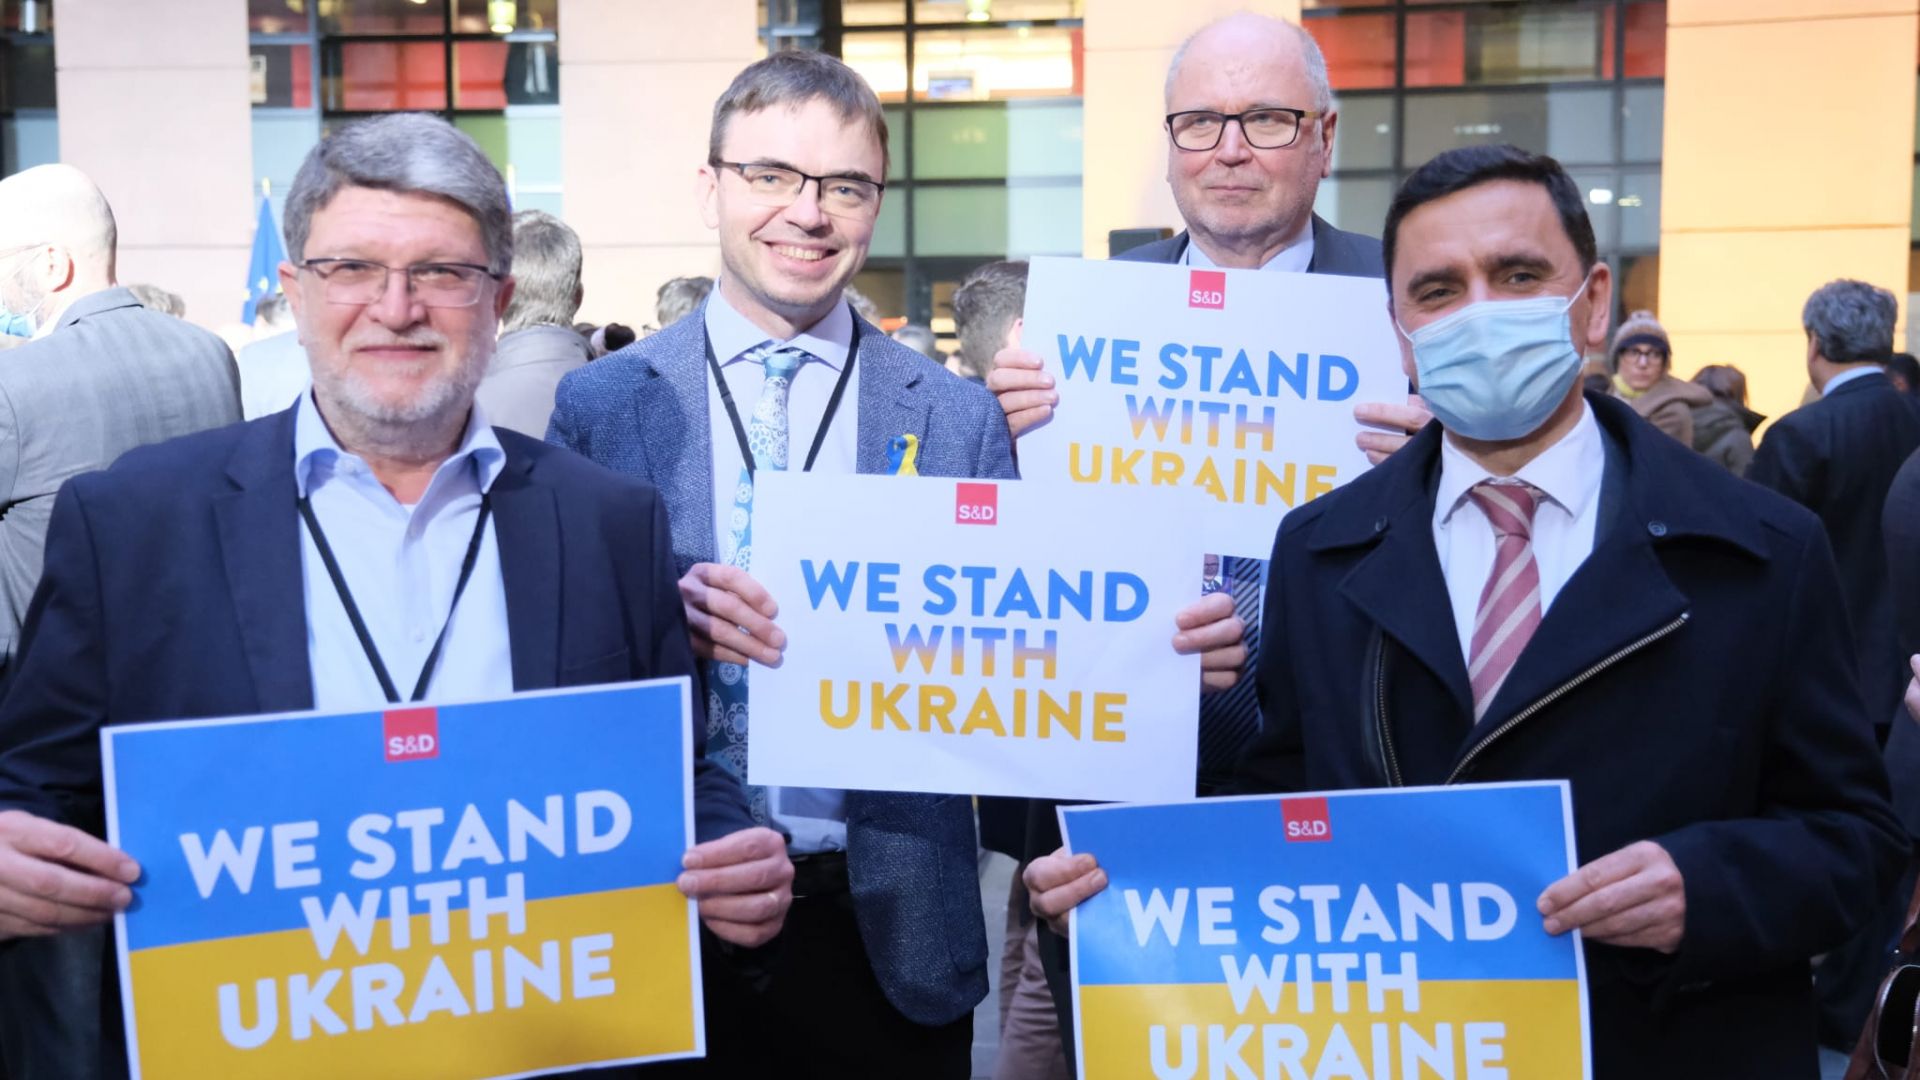 S&D MEPs Picula, Mikser, Heinaluoma and Marques with #StandWithUkraine banners in Strasbourg March 2022